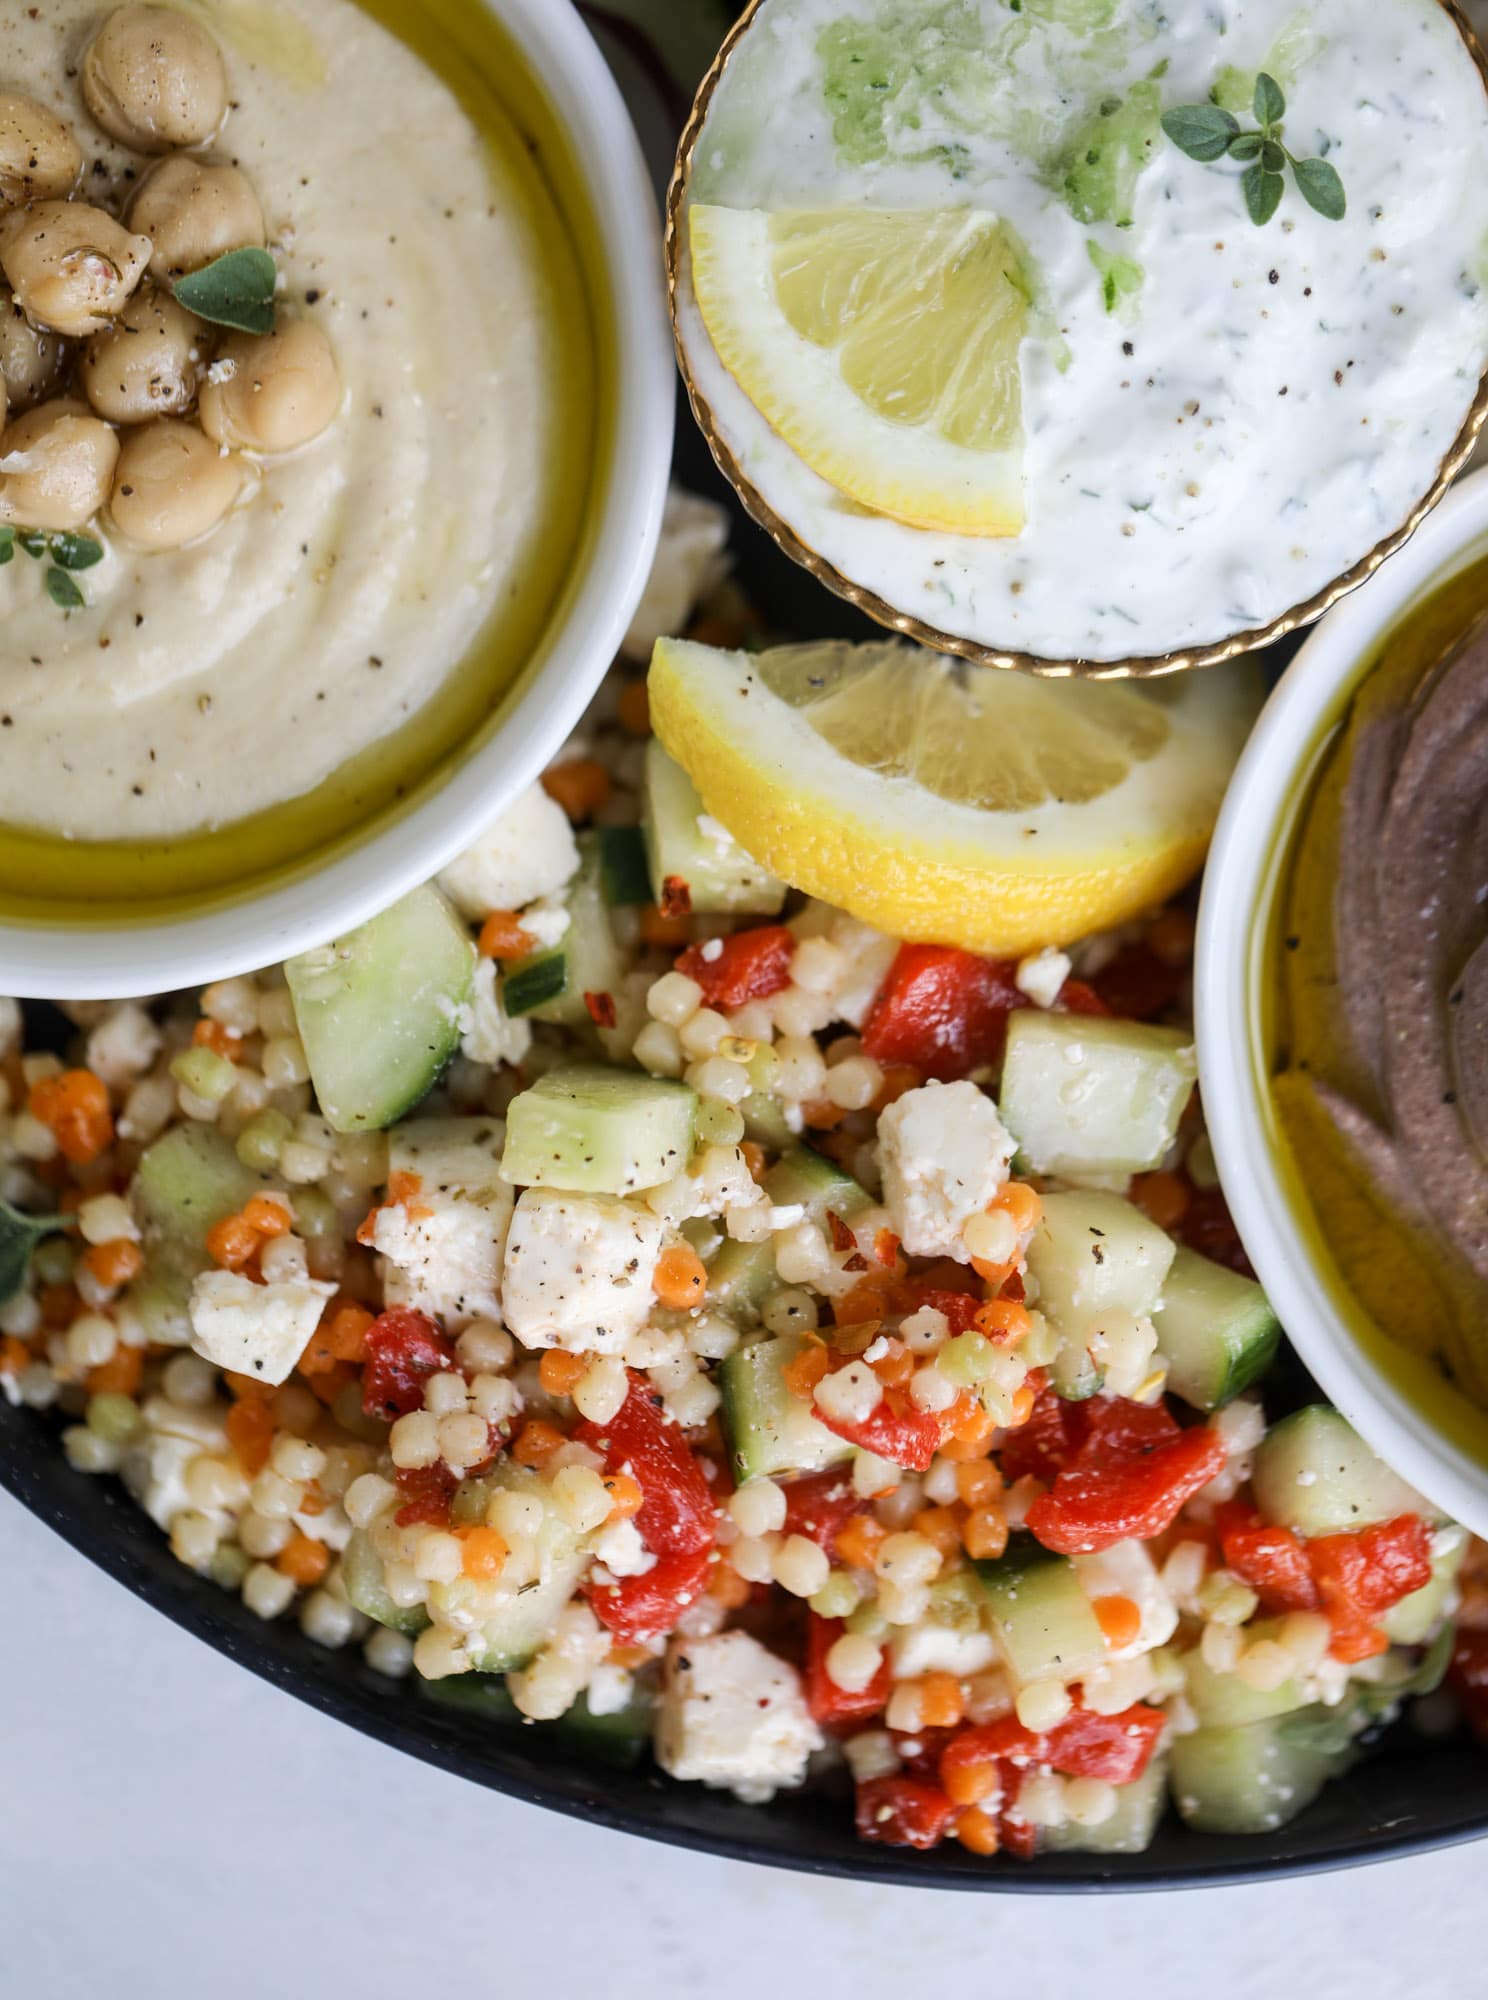 Here you can find out how to make the perfect hummus platter! This trio includes caramelized onion hummus, smoky black bean hummus and roasted red pepper white bean hummus, along with a couscous salad and quick tzatziki! I howsweeteats.com #hummus #platter #appetizer #snack #chickpeas #healthy #blackbeans #yogurt #tzatziki